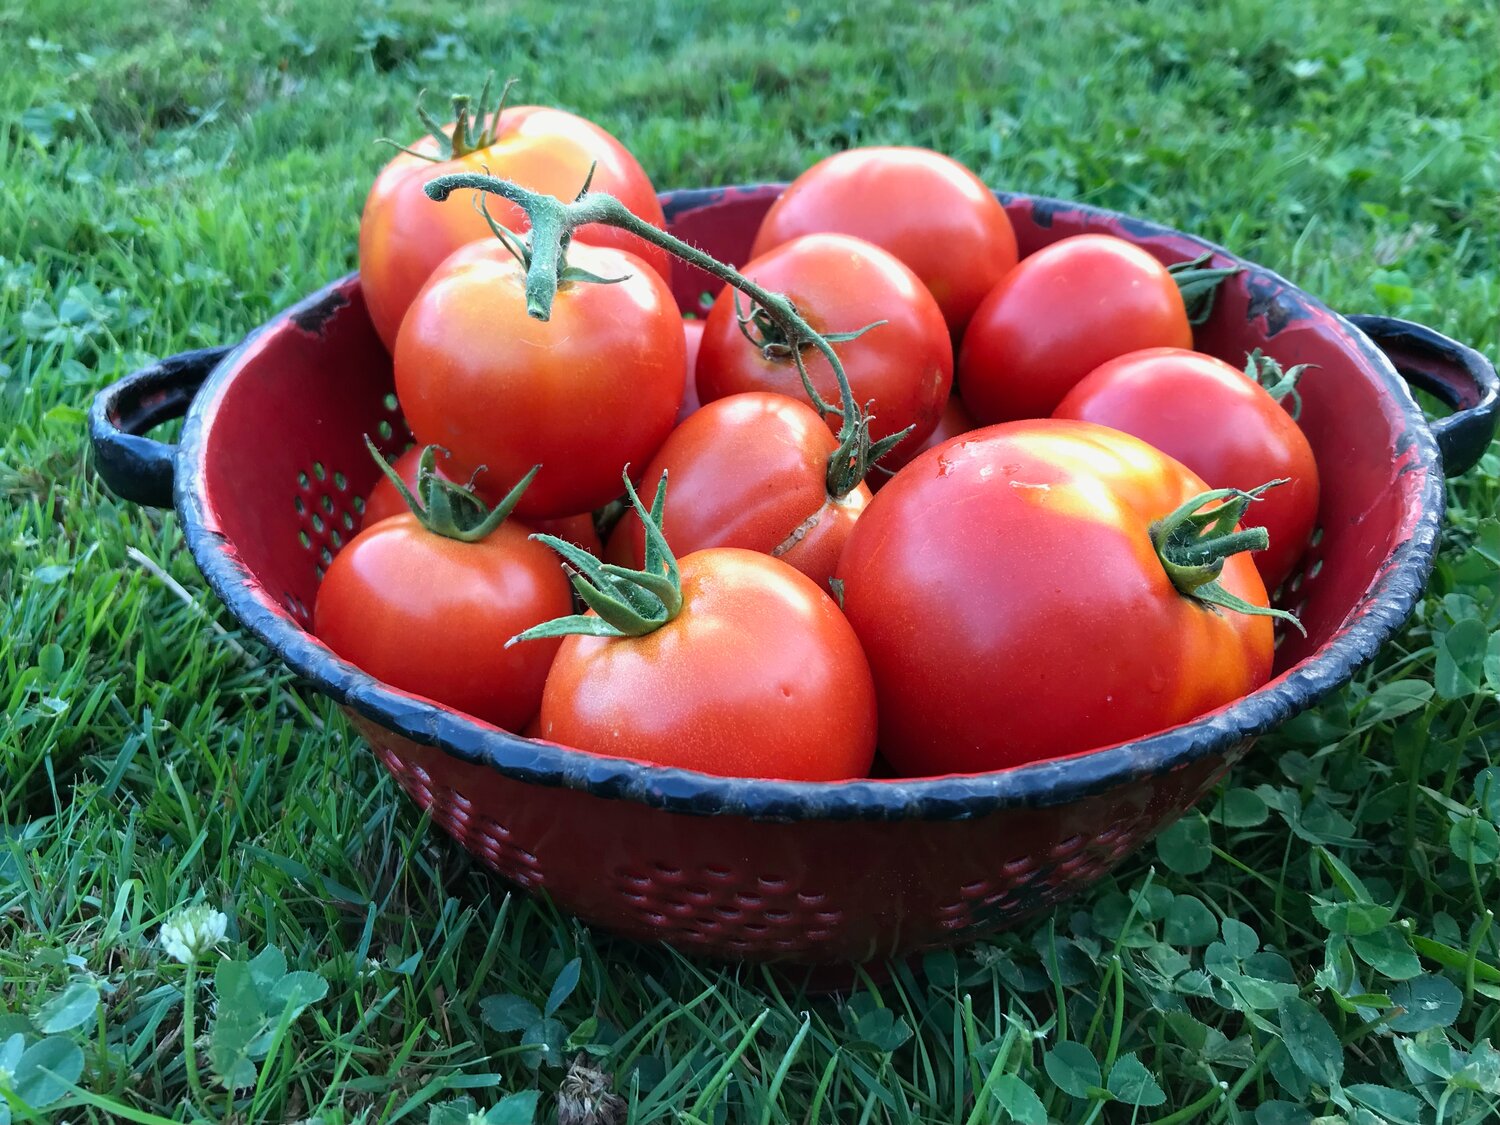 Beautiful tomatoes, some with slightly sunburned shoulders.